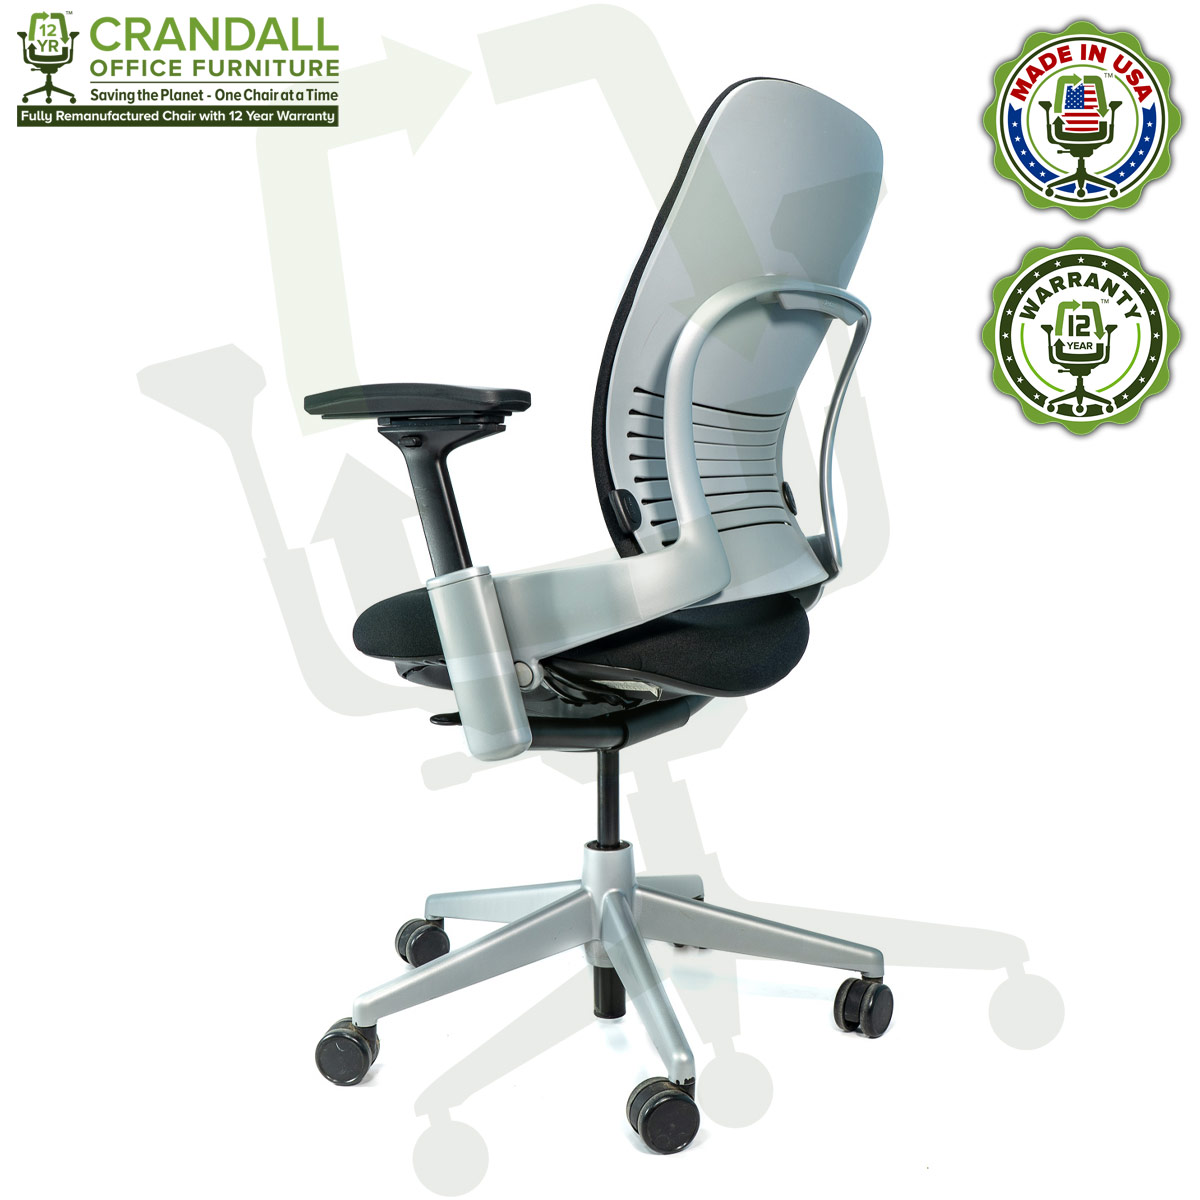 Crandall Office Furniture Remanufactured Steelcase V2 Leap Chair - Platinum Frame 06